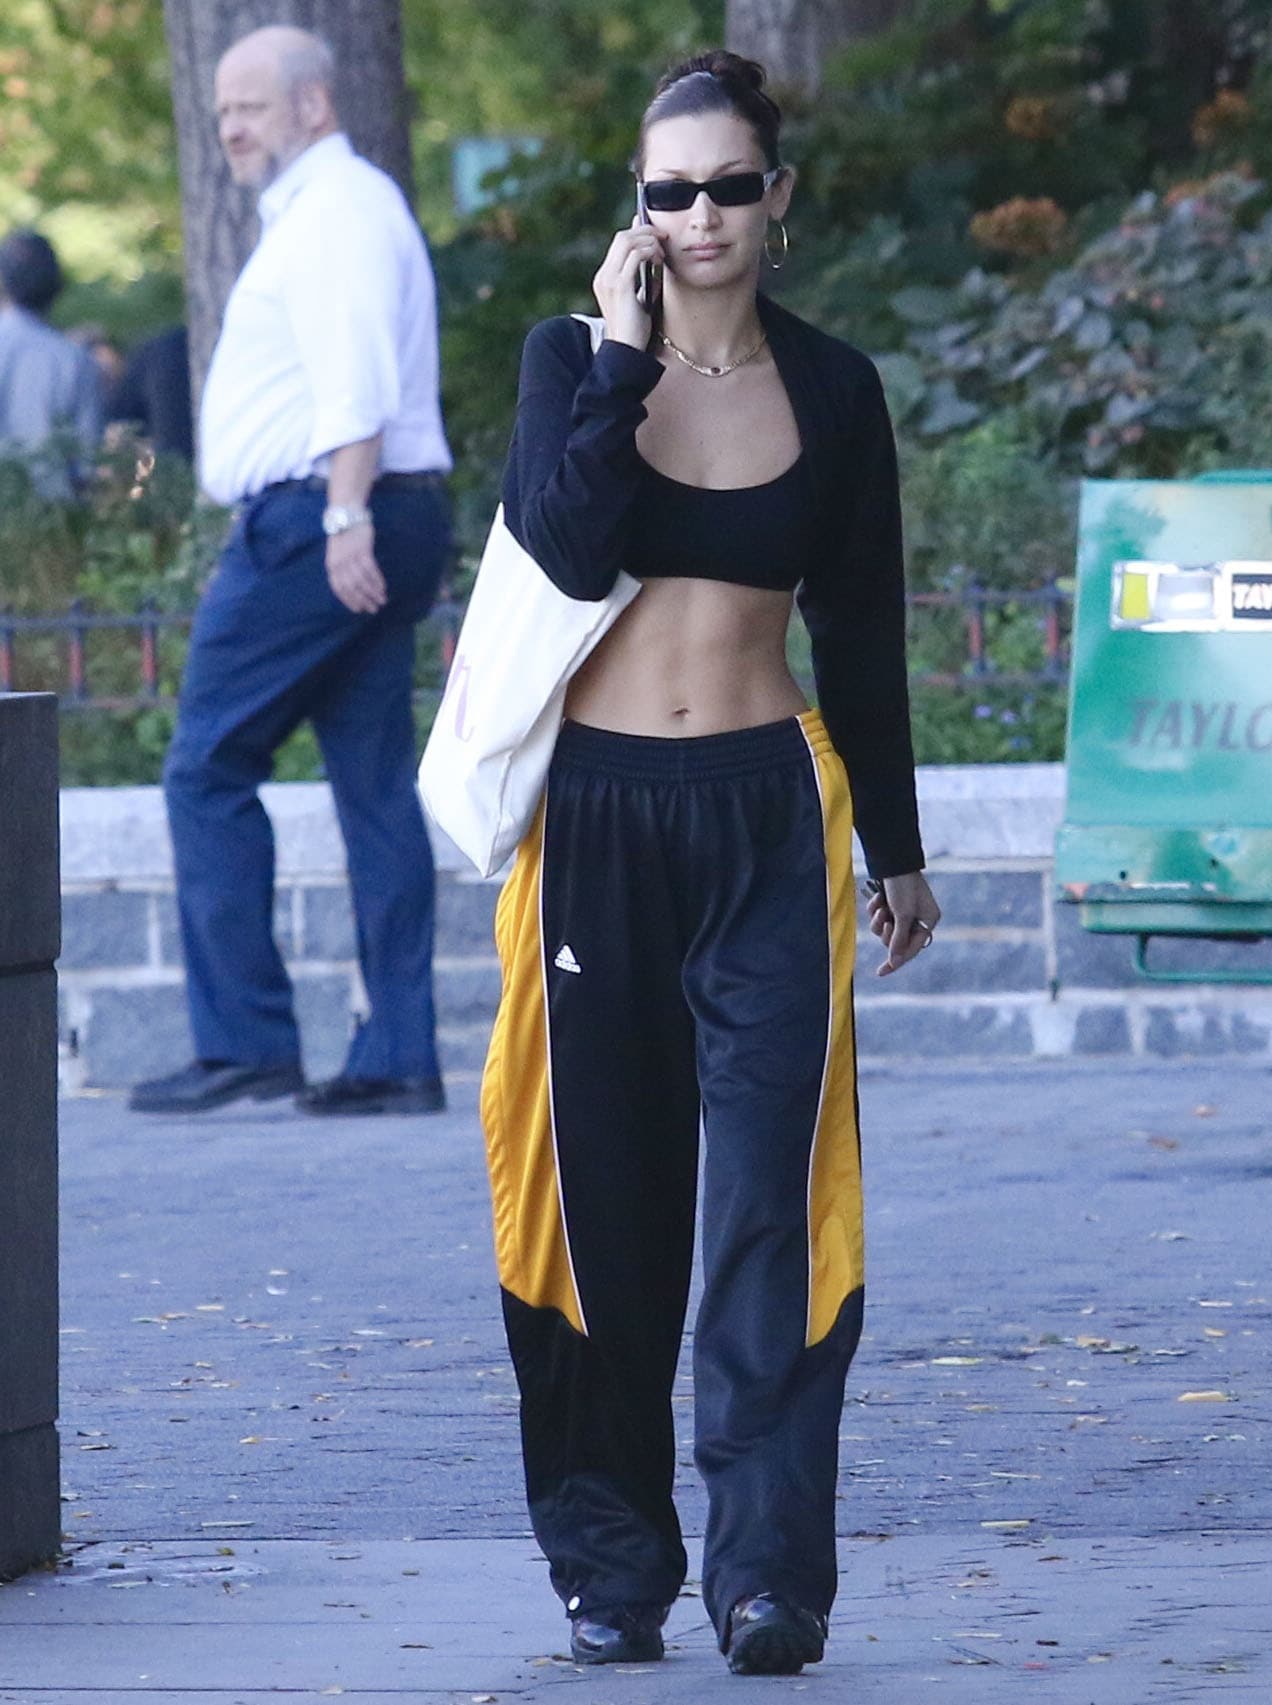 Bella Hadid flashes her toned abs in an Alo Yoga bra top, Adidas track pants, and Alexander McQueen shrug